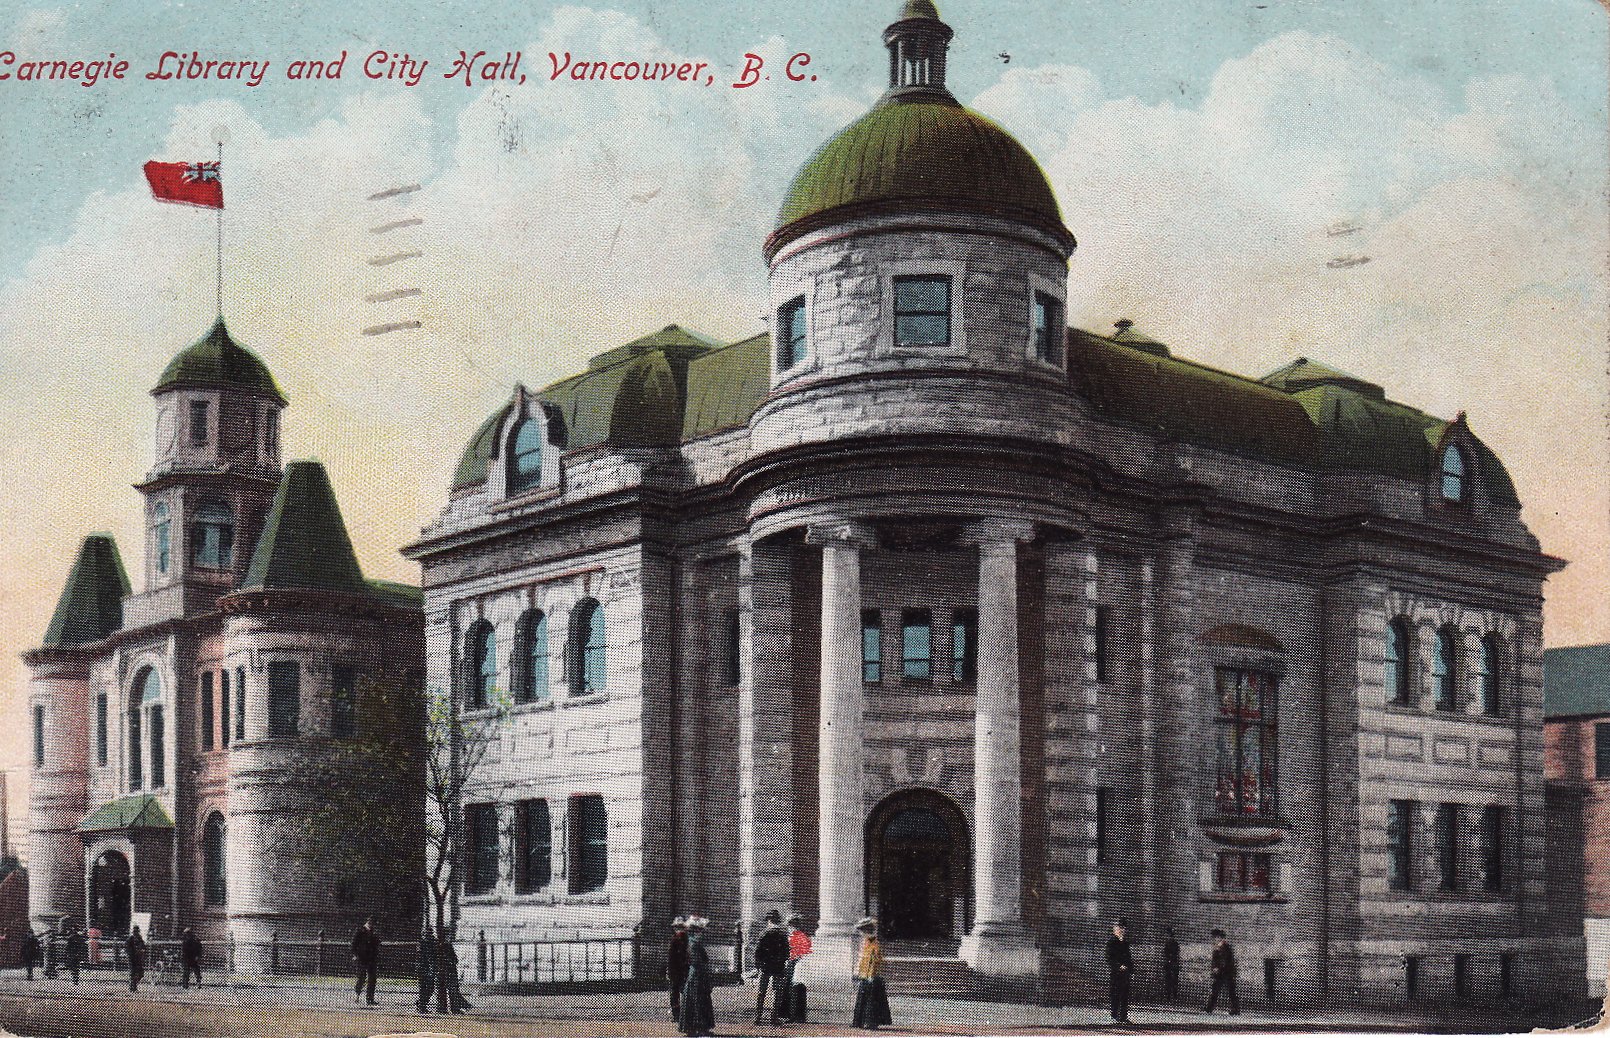 Postcard of two grand stone buildings. One has the Red Ensign flying from the roof.